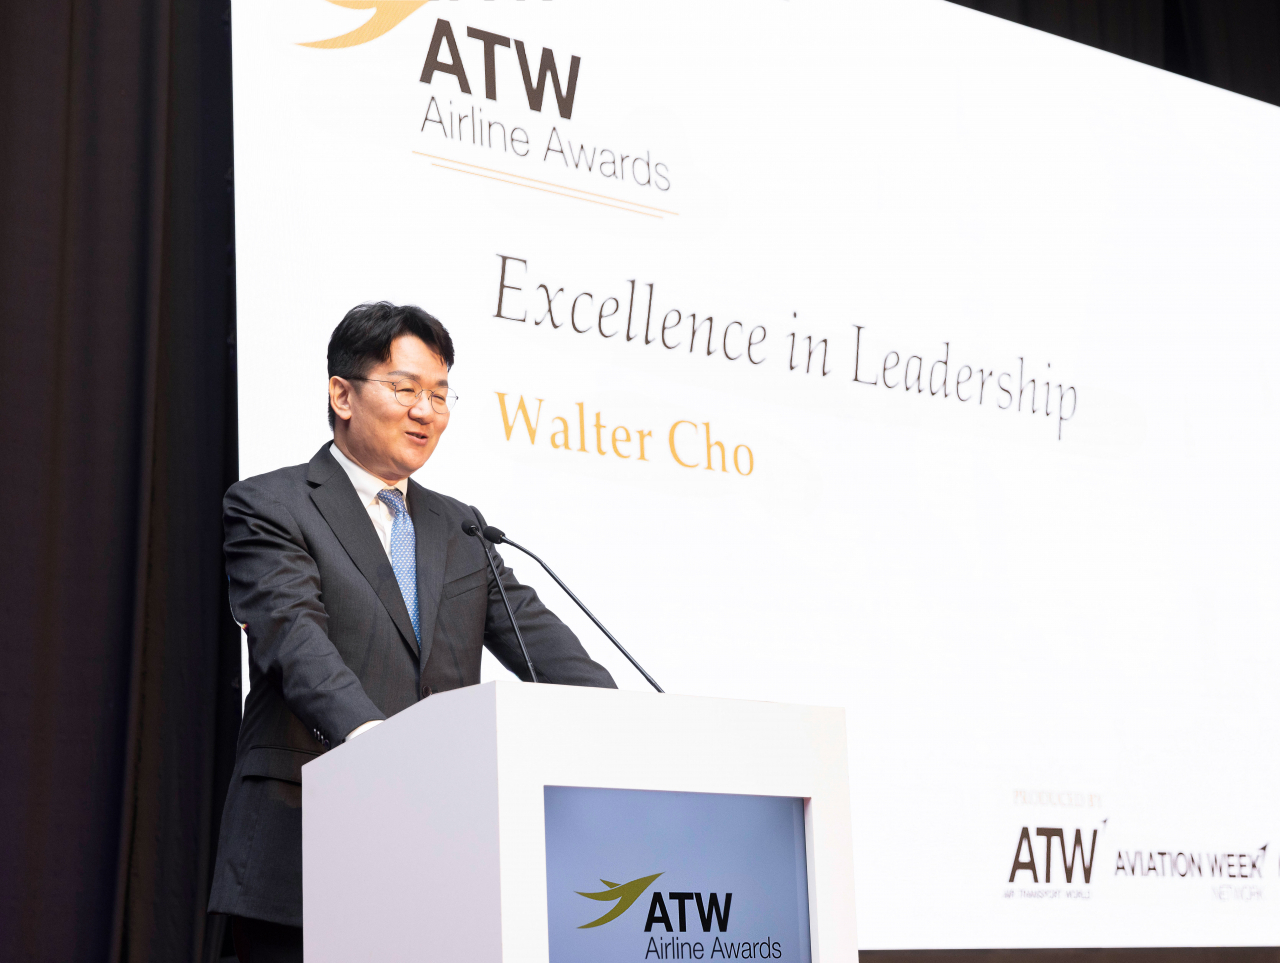 Hanjin Group Chairman Walter Cho, who doubles as Korean Air CEO, delivers an acceptance speech for winning the Excellence in Leadership Award, given by Air Transport World, at the Grand Cevahir Hotel in Istanbul on Friday. (Korean Air)